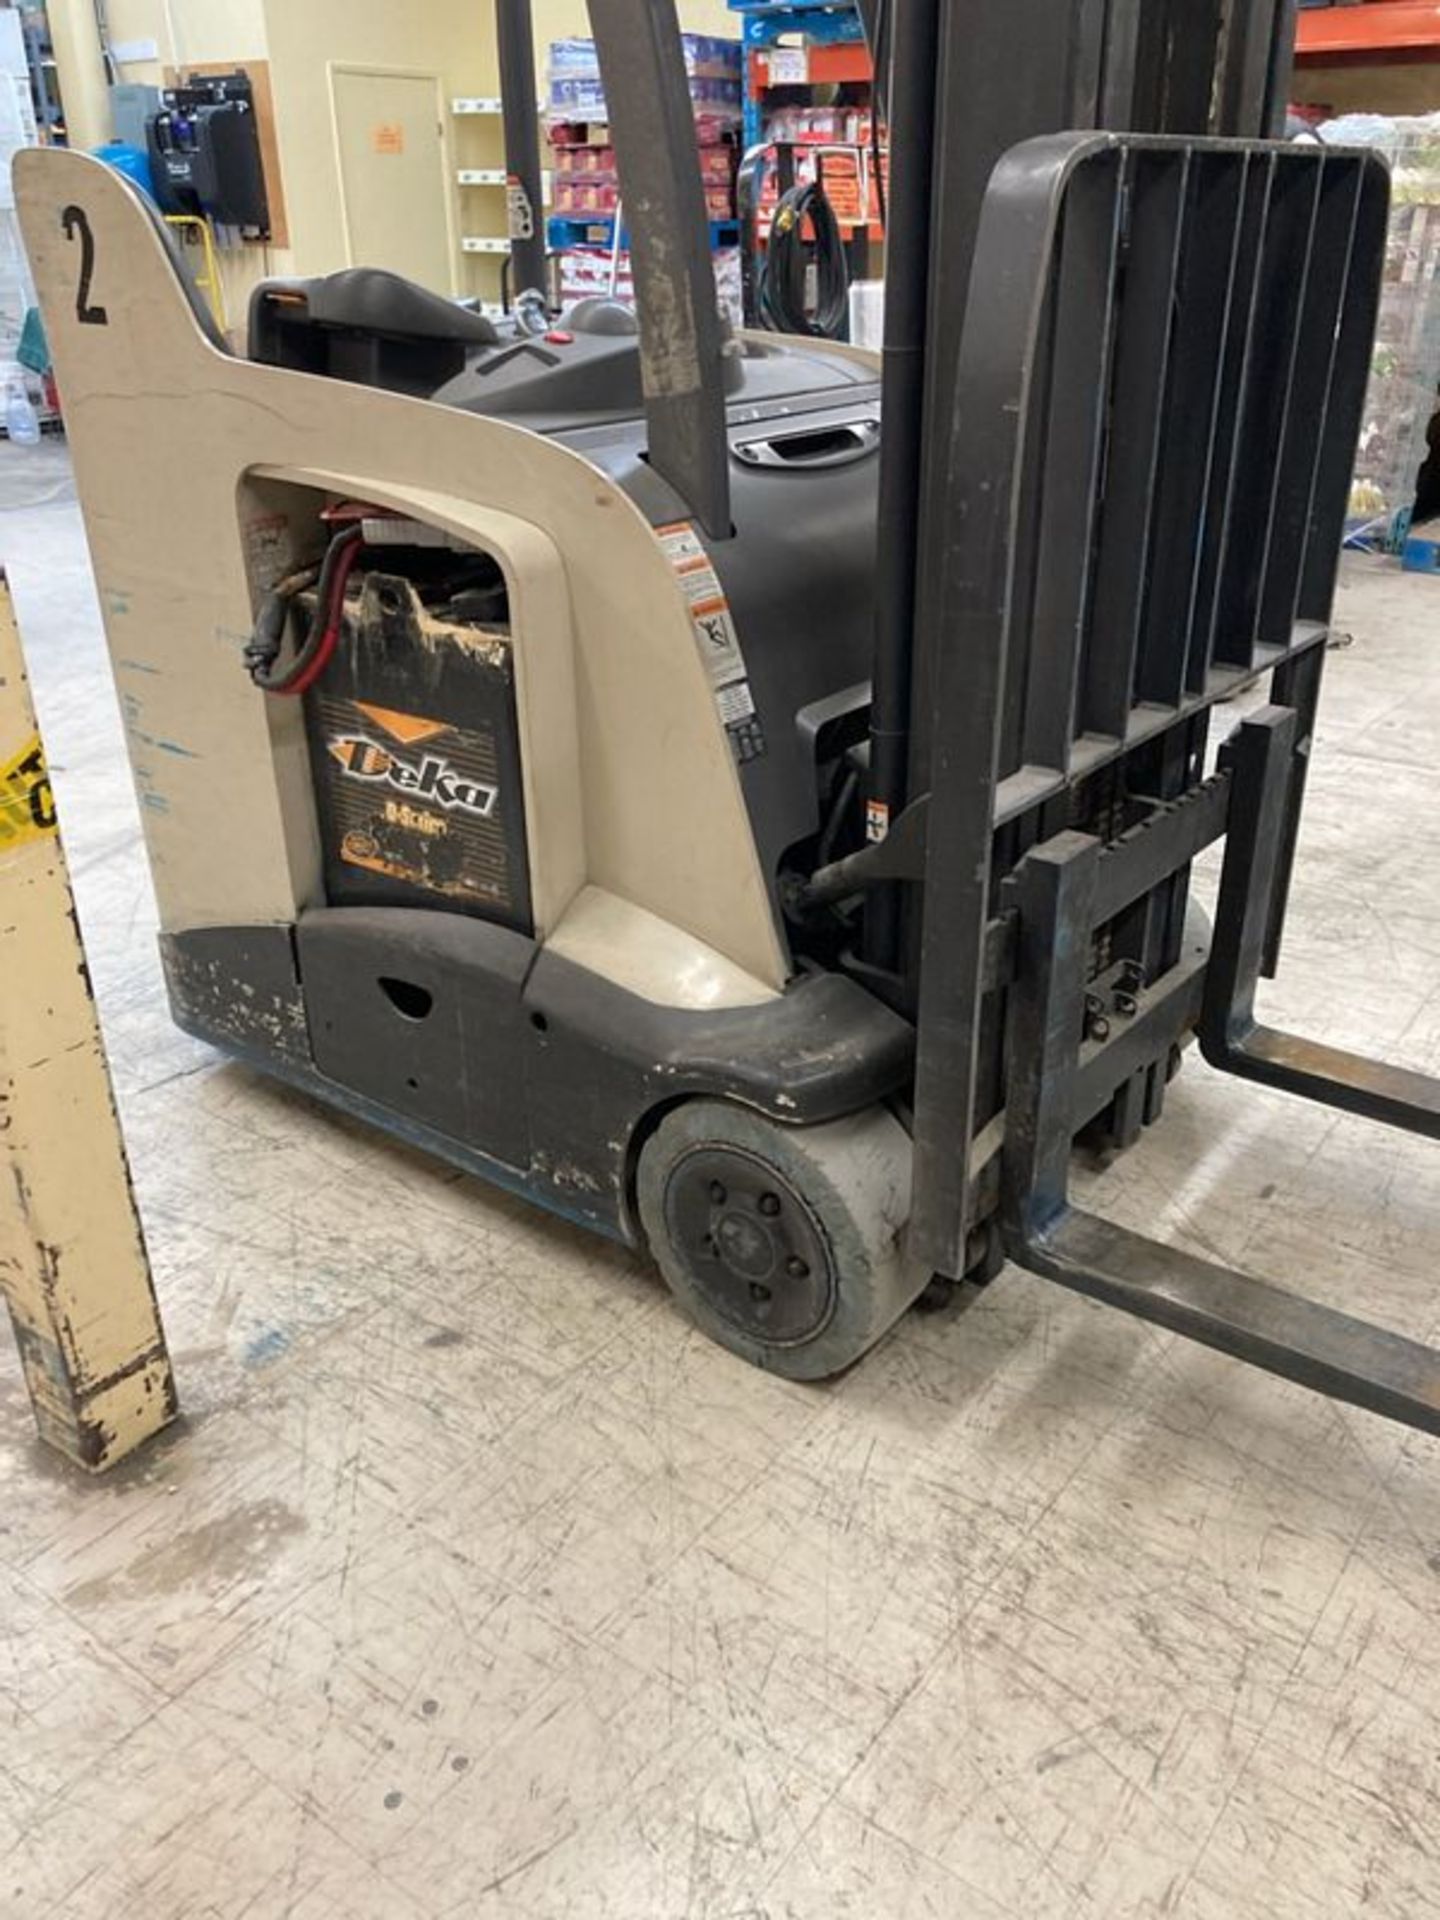 Crown 3 Stage Electric Stand Up Forklift - Note No Charger - Image 2 of 2